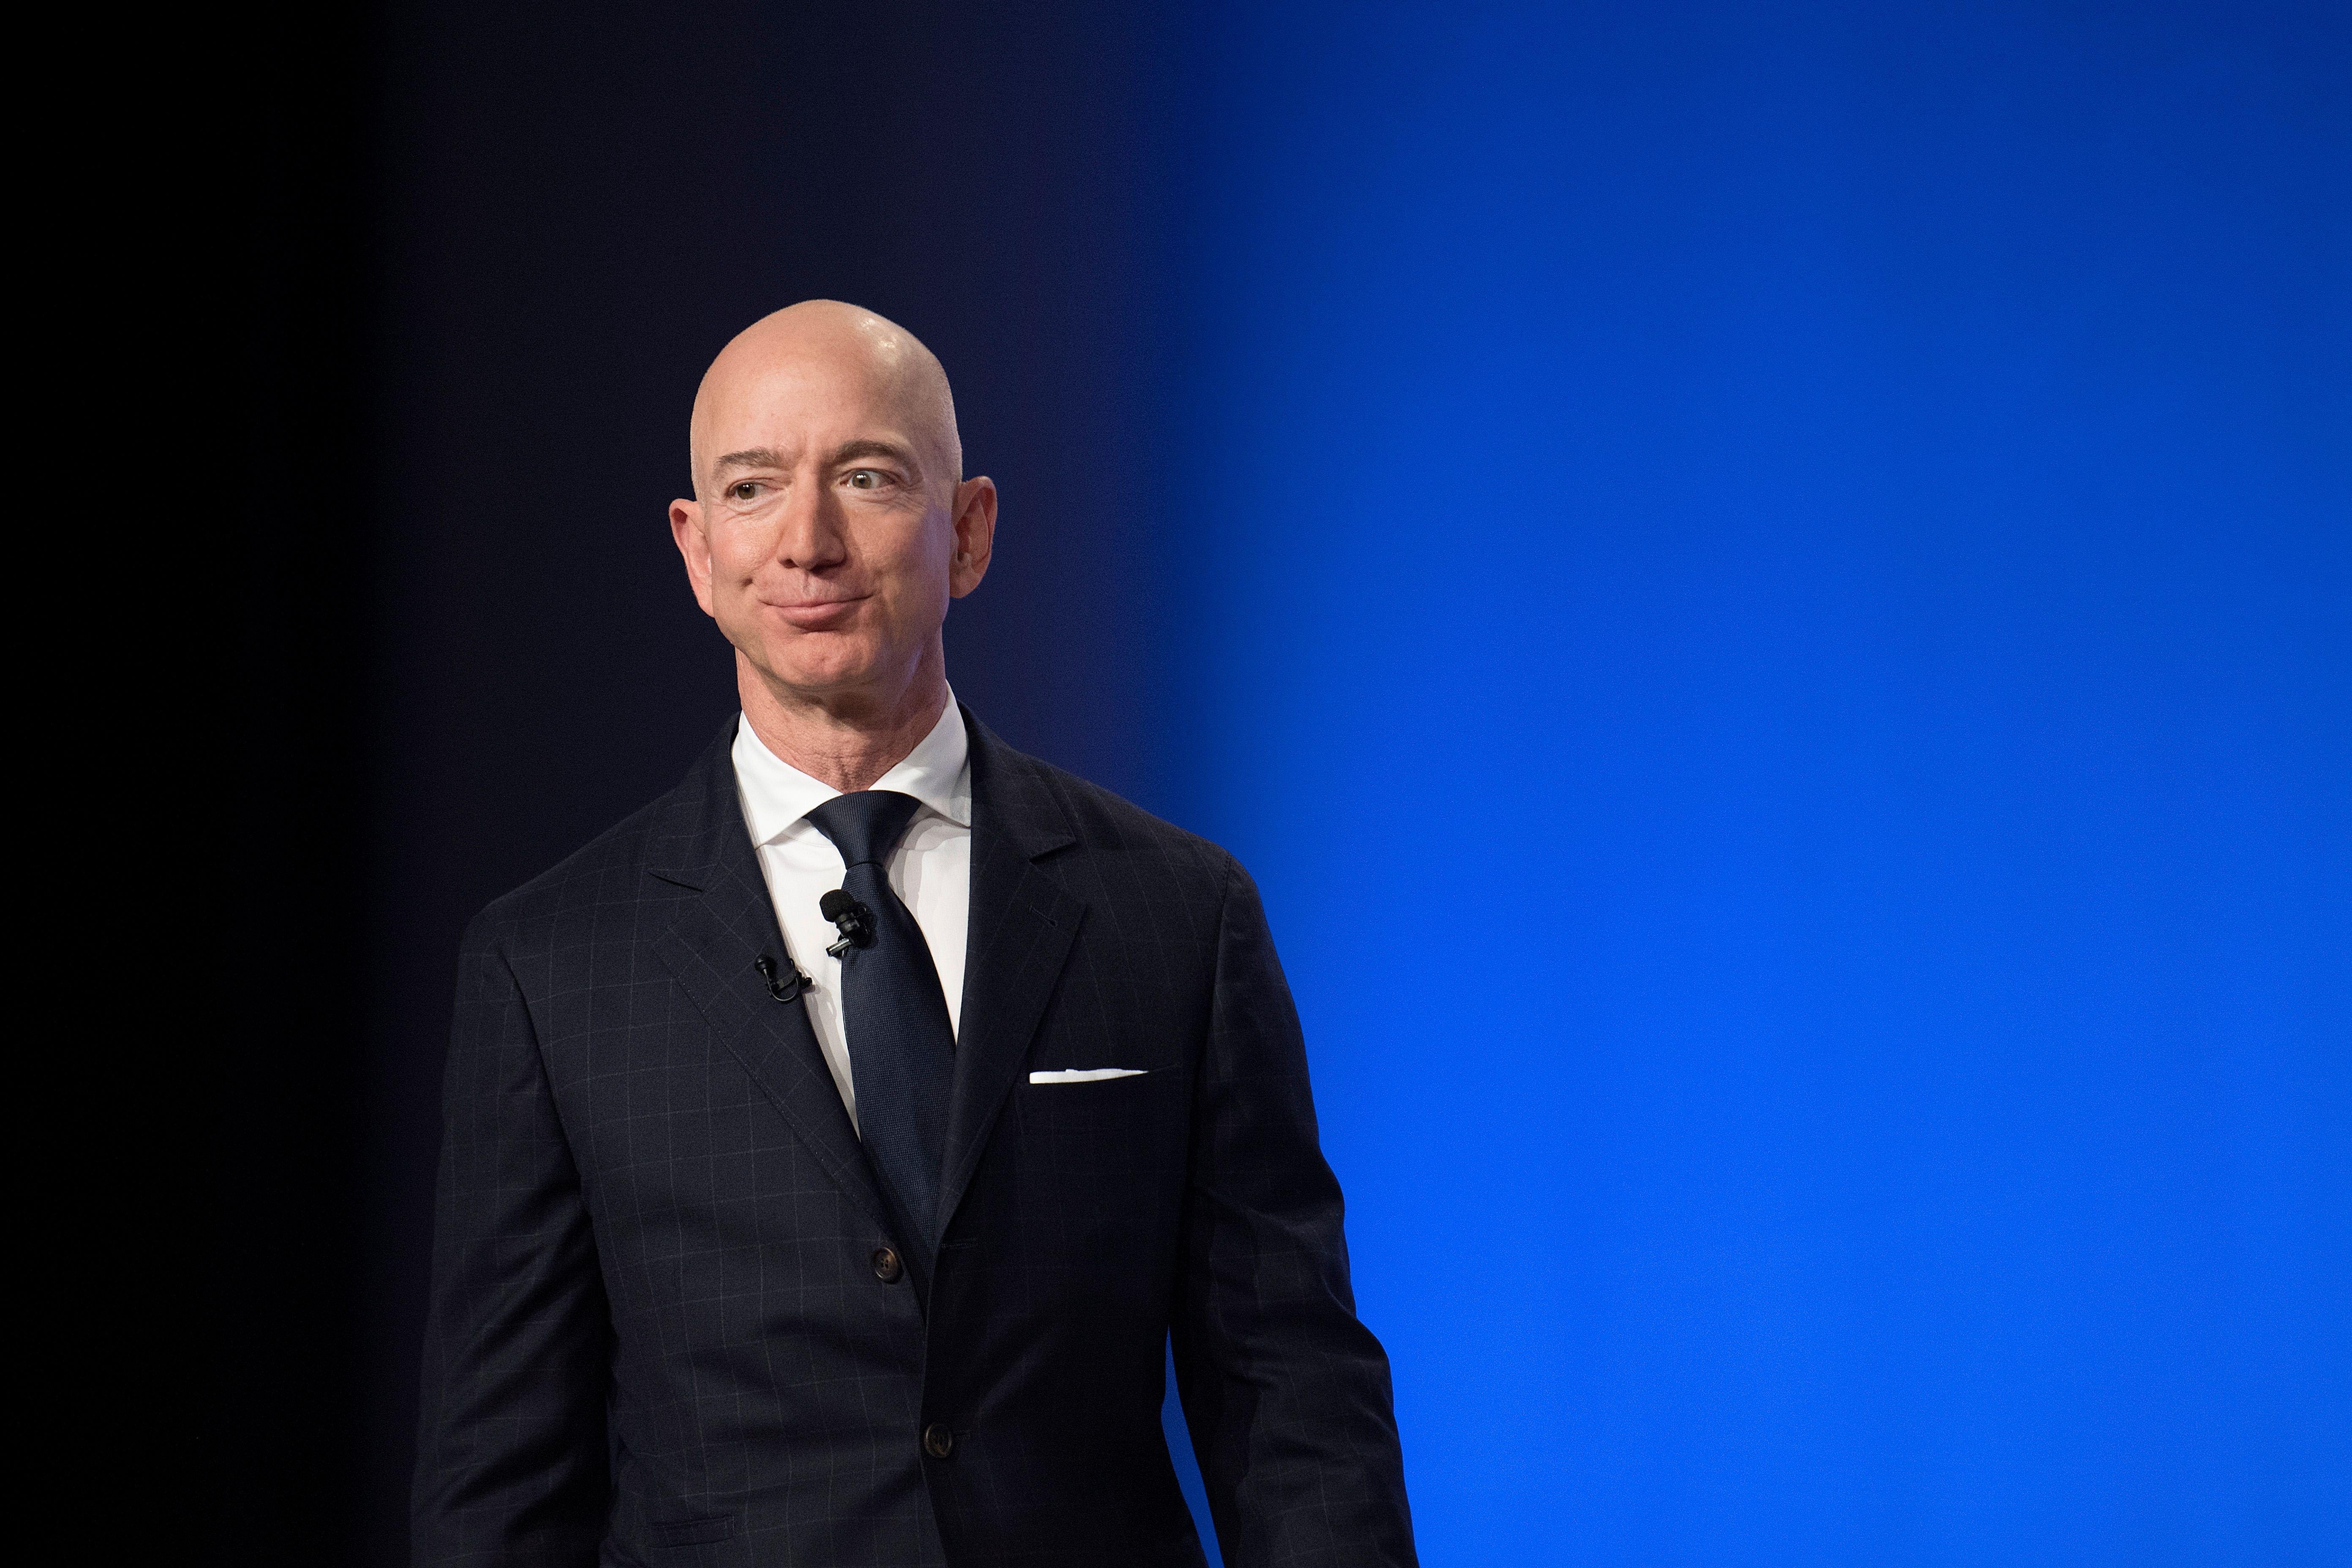 Amazon and Blue Origin founder Jeff Bezos provides the keynote address at the Air Force Association's Annual Air, Space & Cyber Conference in Oxen Hill, MD, on September 19, 2018. (Photo by Jim WATSON / AFP)        (Photo credit should read JIM WATSON/AFP/Getty Images)